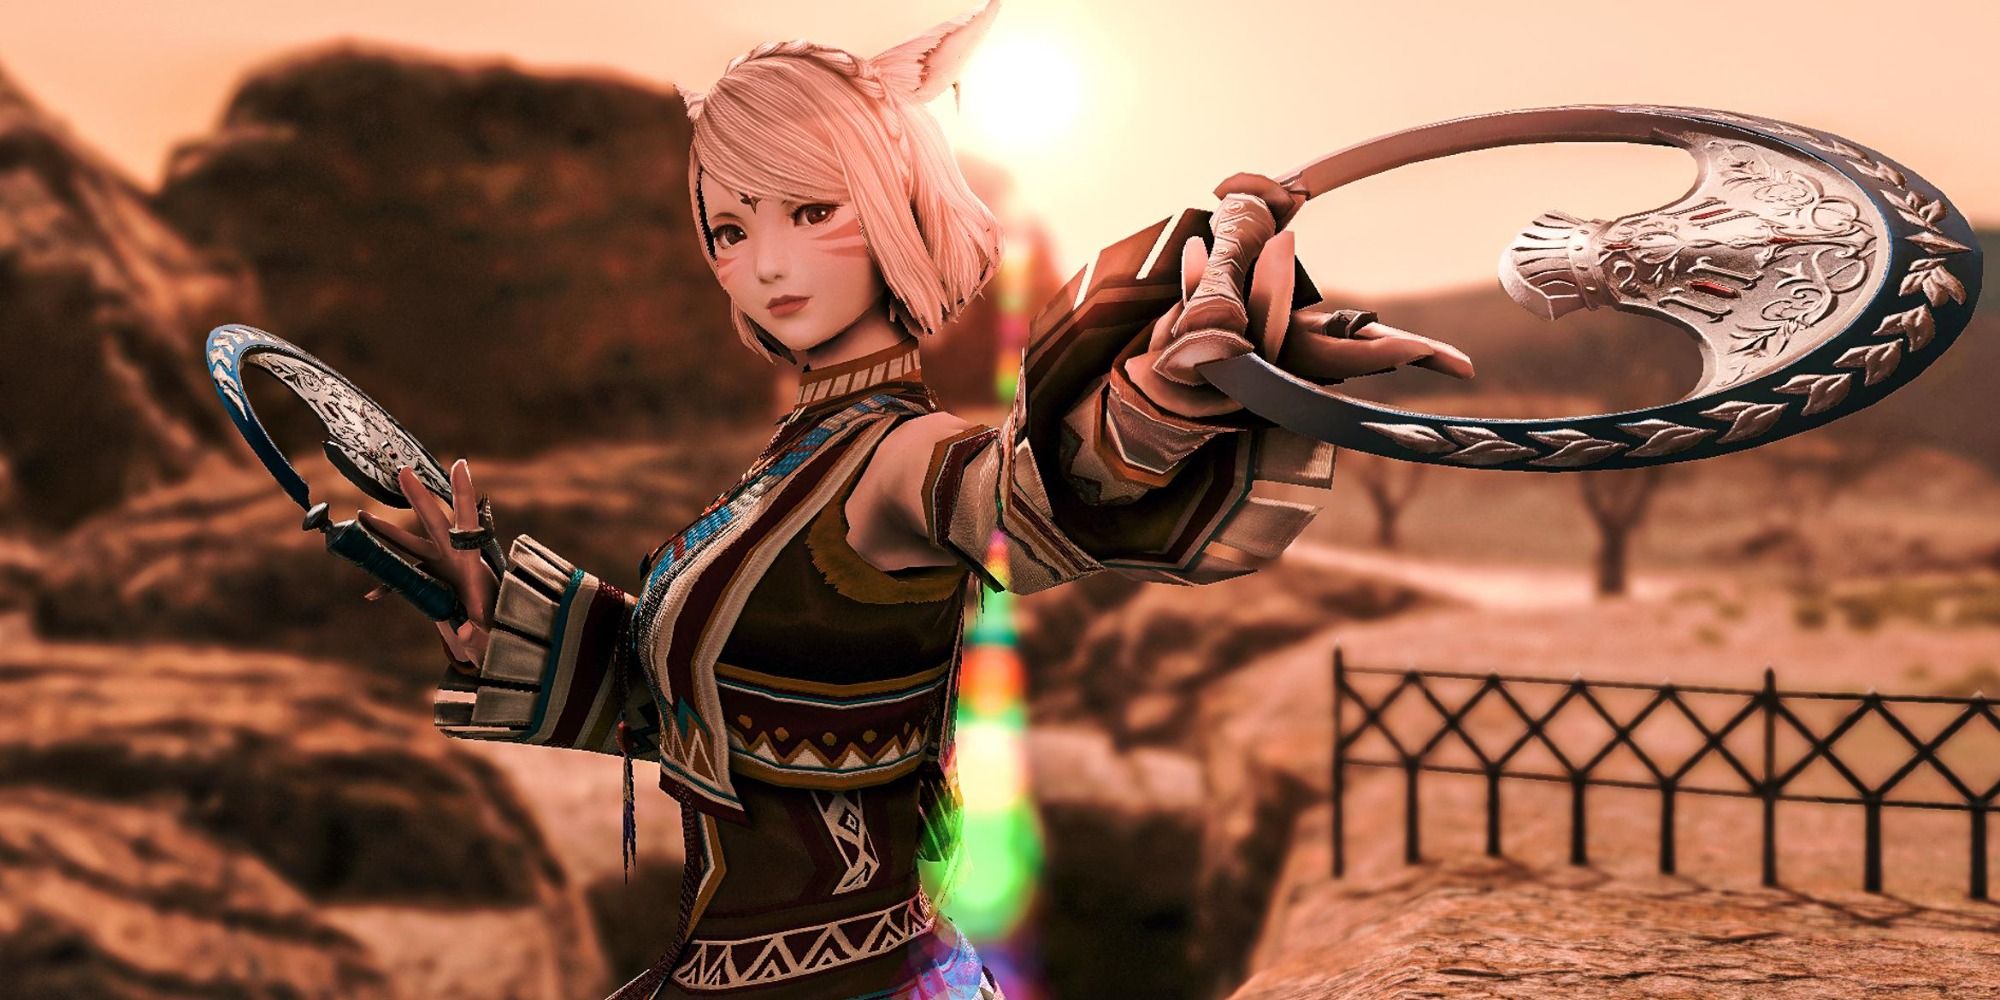 Miqote holding Dancer weapons in Final Fantasy 14